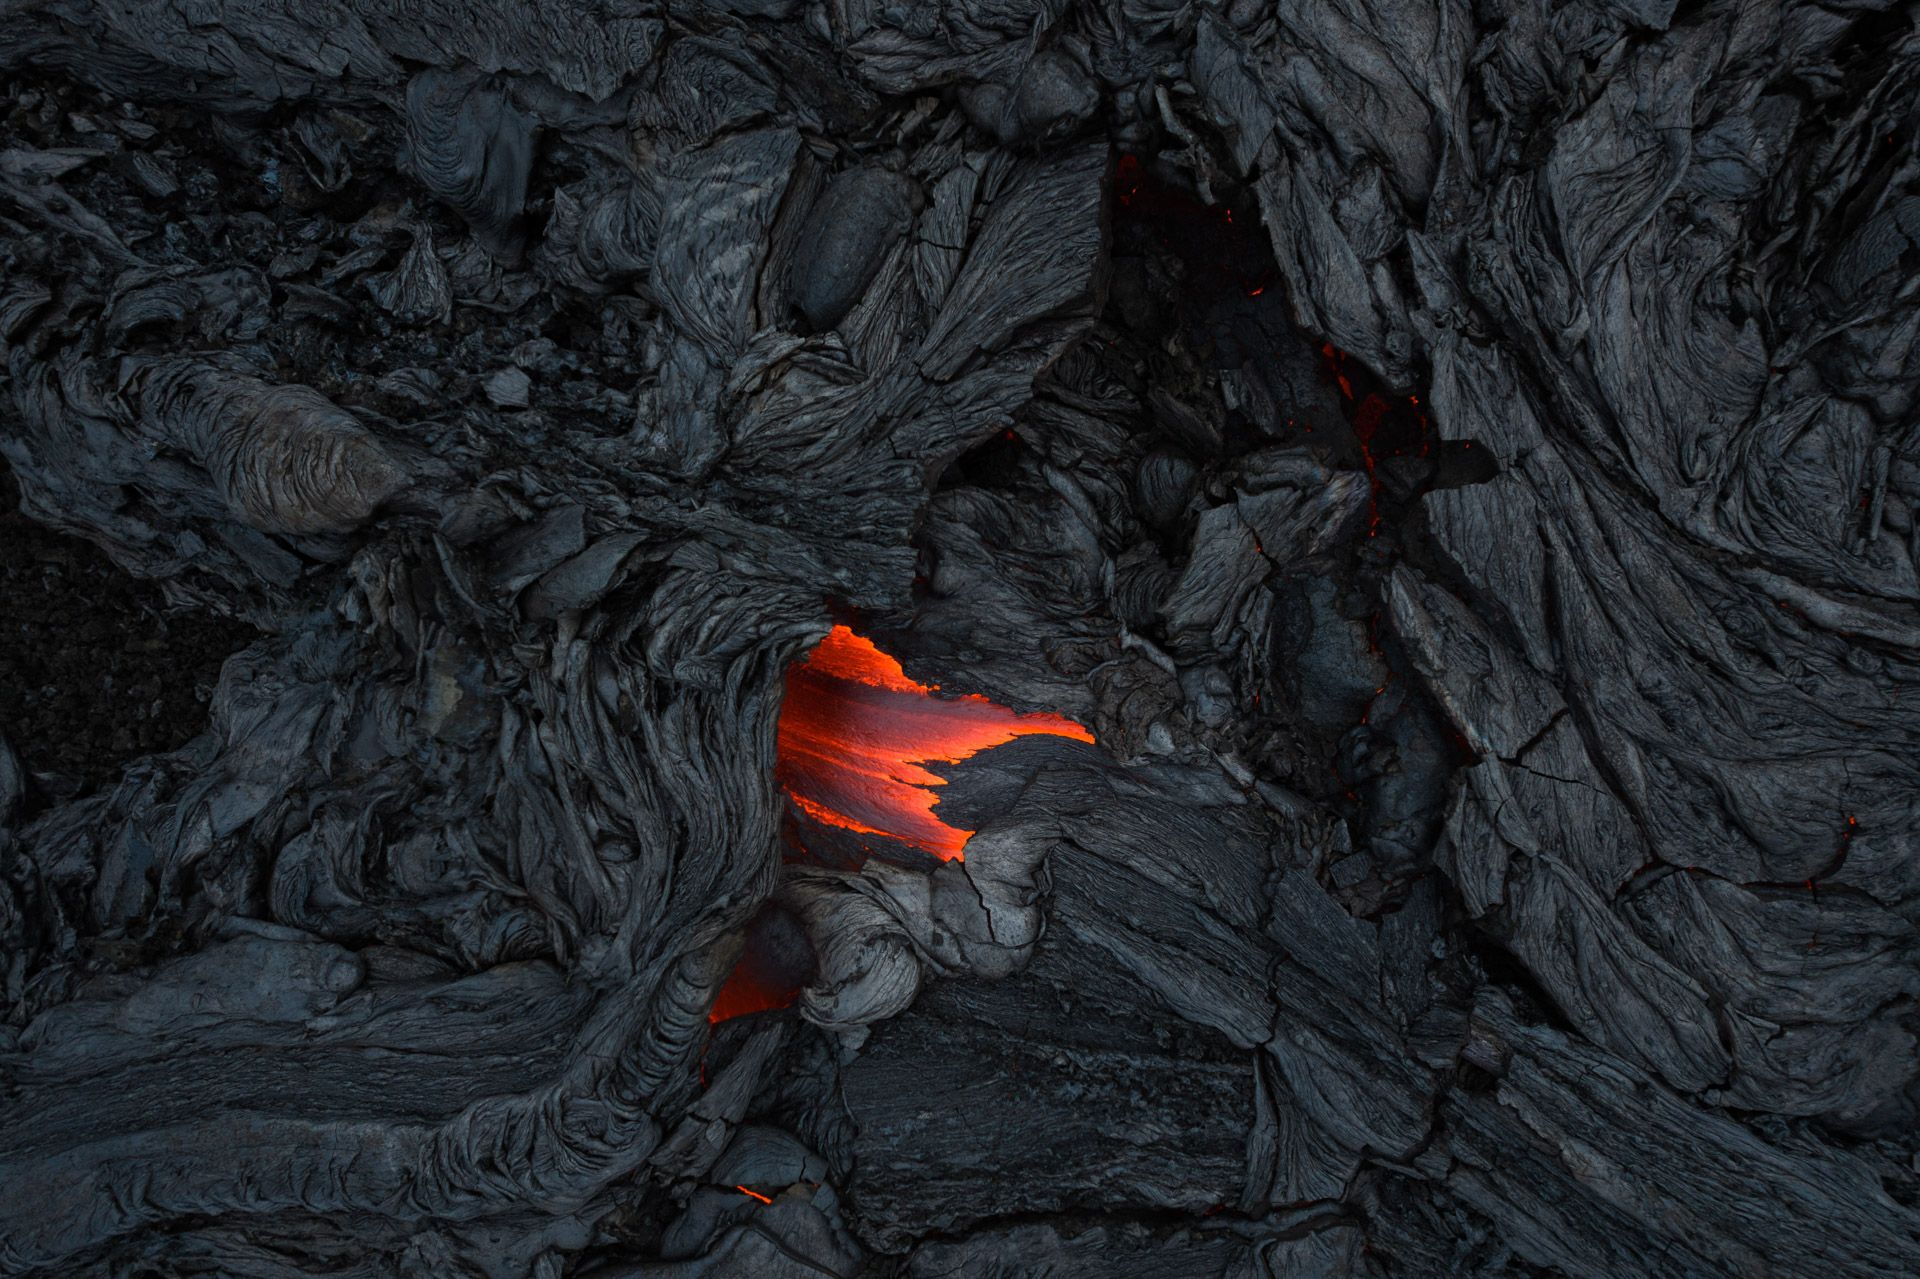 a small strip of red and orange lava in the center of a charred black expanse